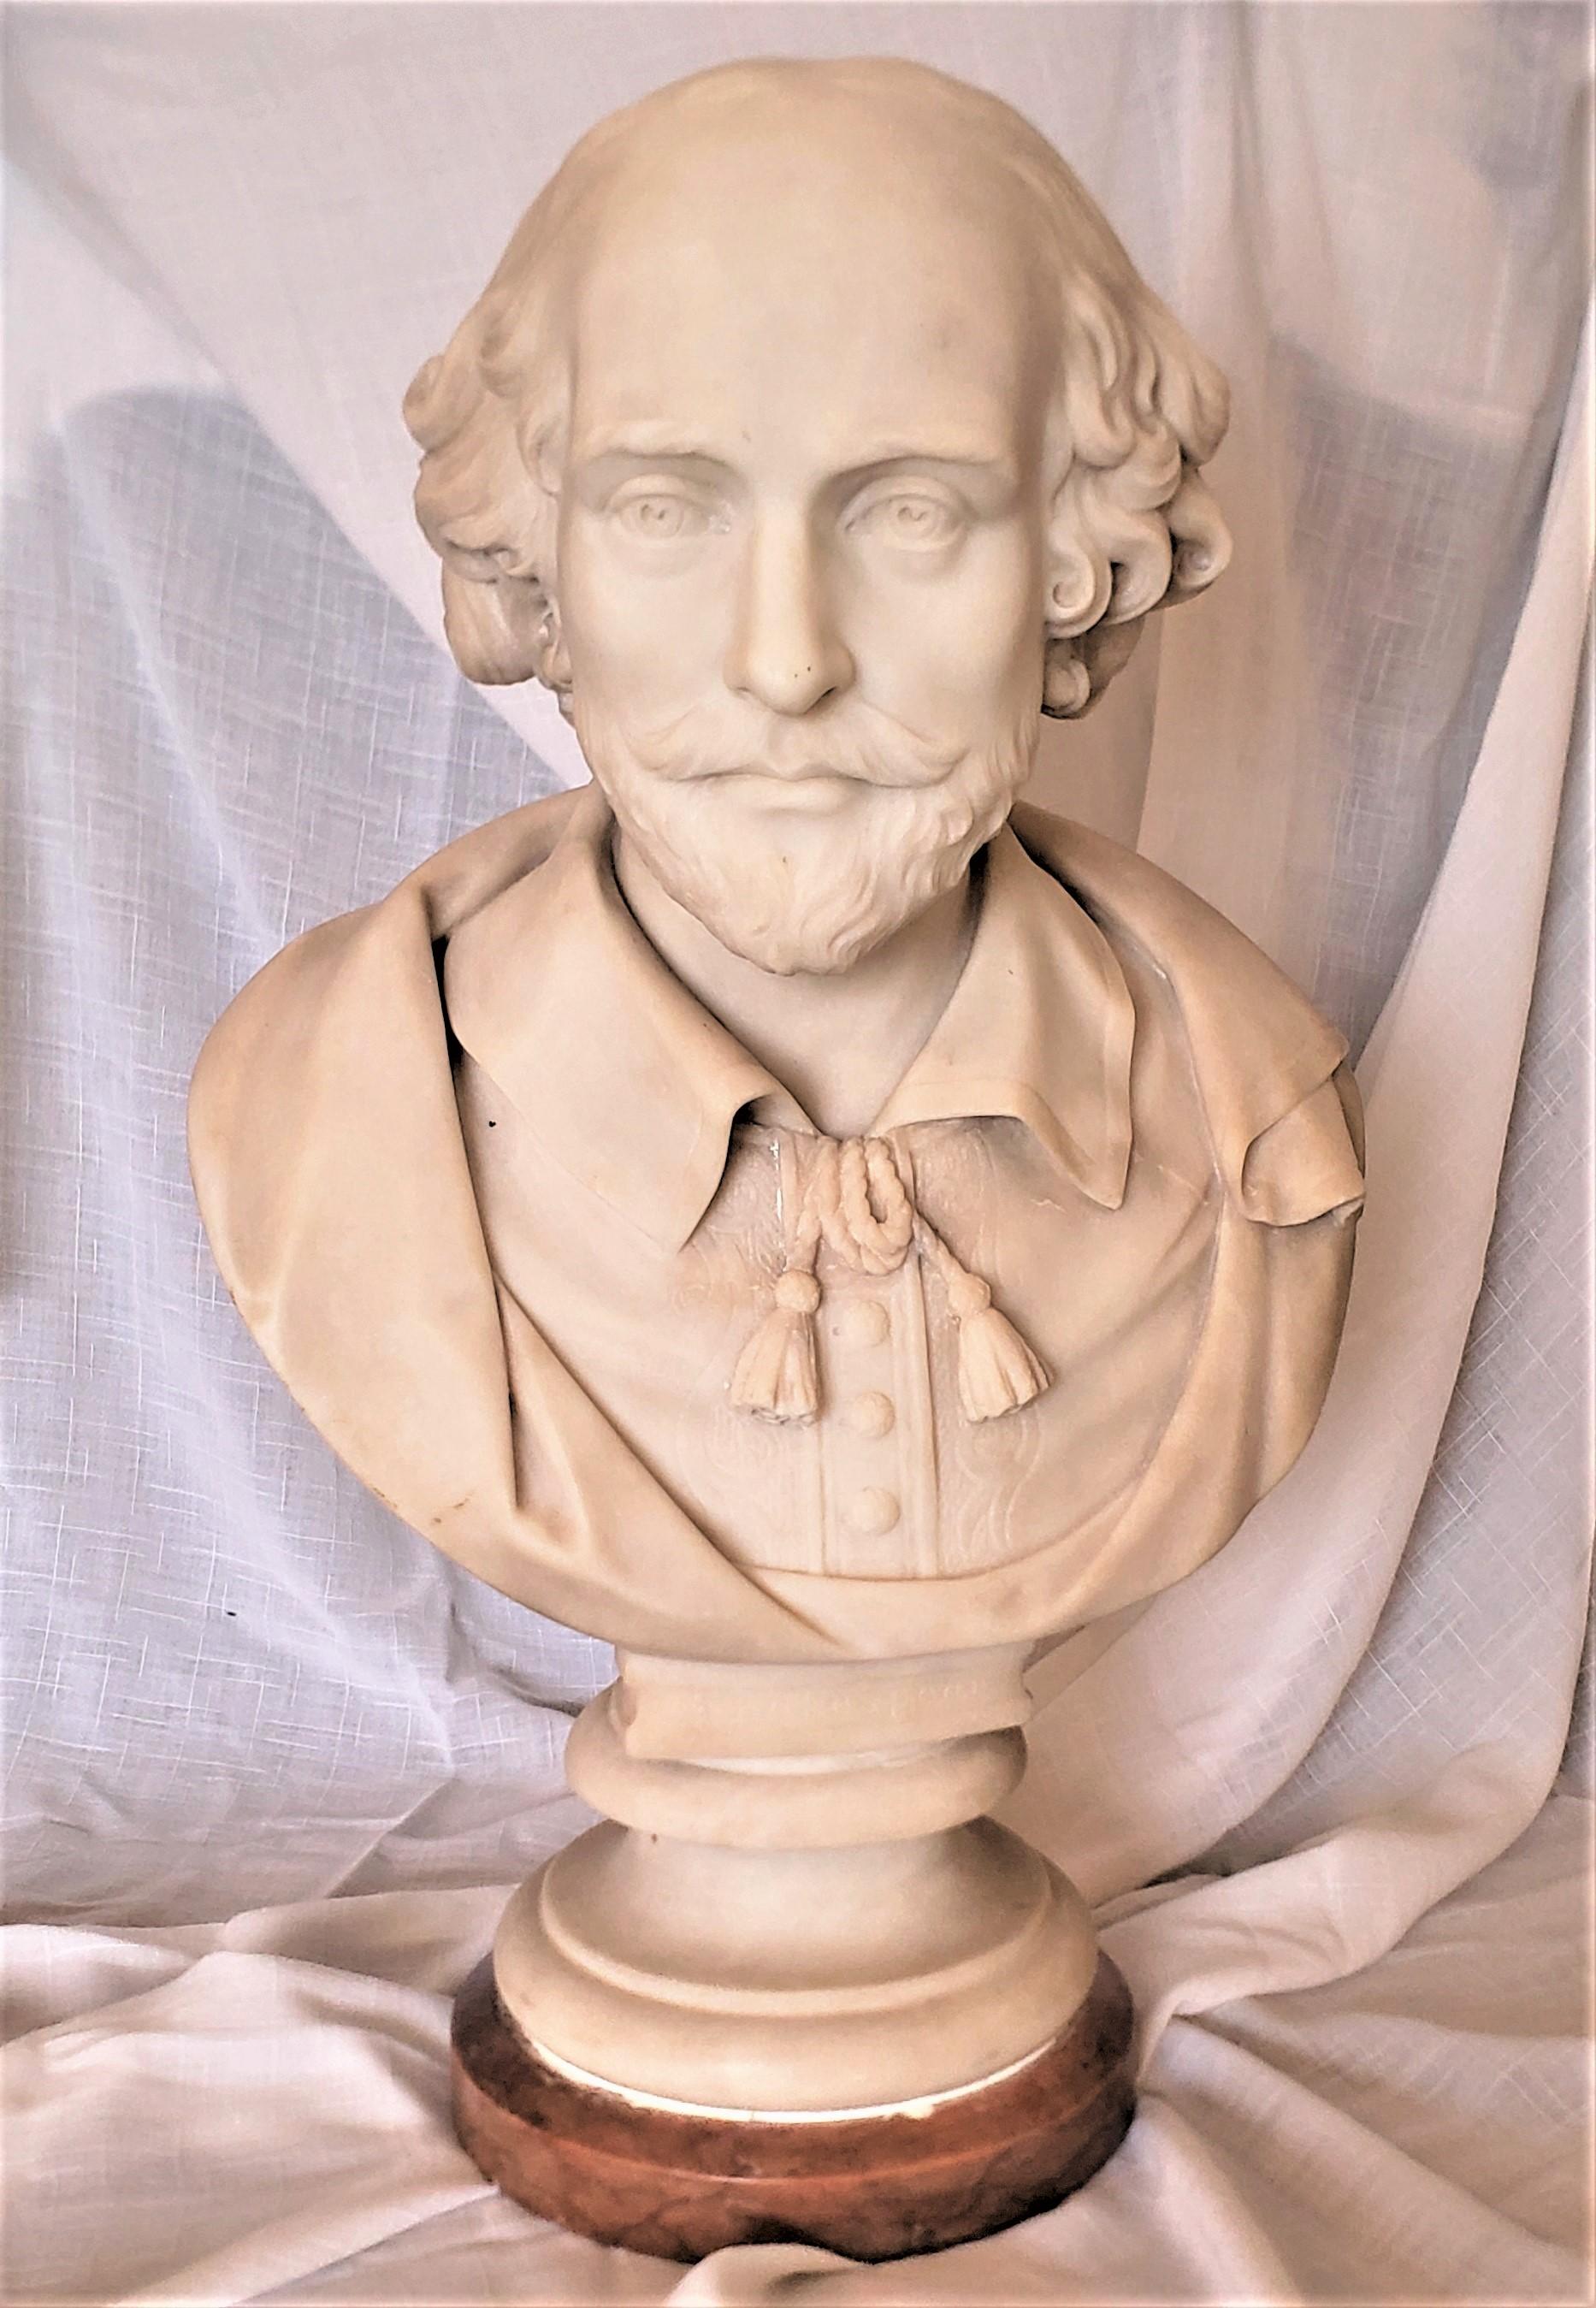 This substantial and well executed hand-carved marble bust is signed by an unknown artist, and originates from England and done in the period Victorian style. The sculpture depicts a study of an English gentleman in high period costume, with hair